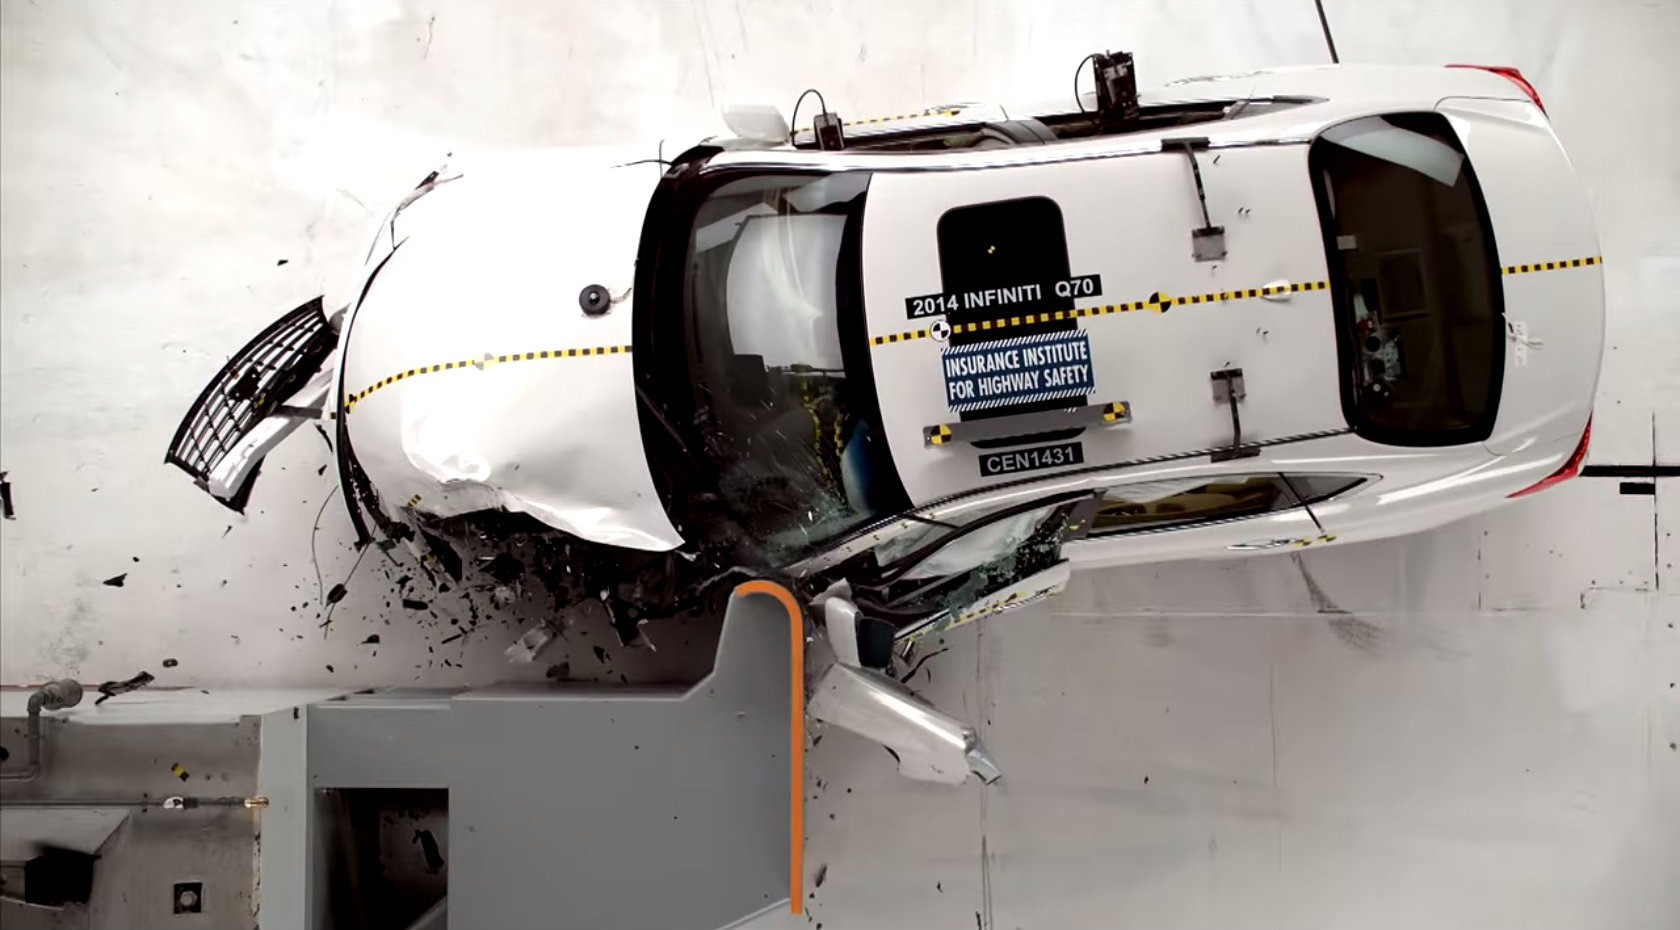 infiniti-q70-aces-small-overlap-front-crash-test-earns-iihs-top-safety-pick-award-video-87403_1.jpg